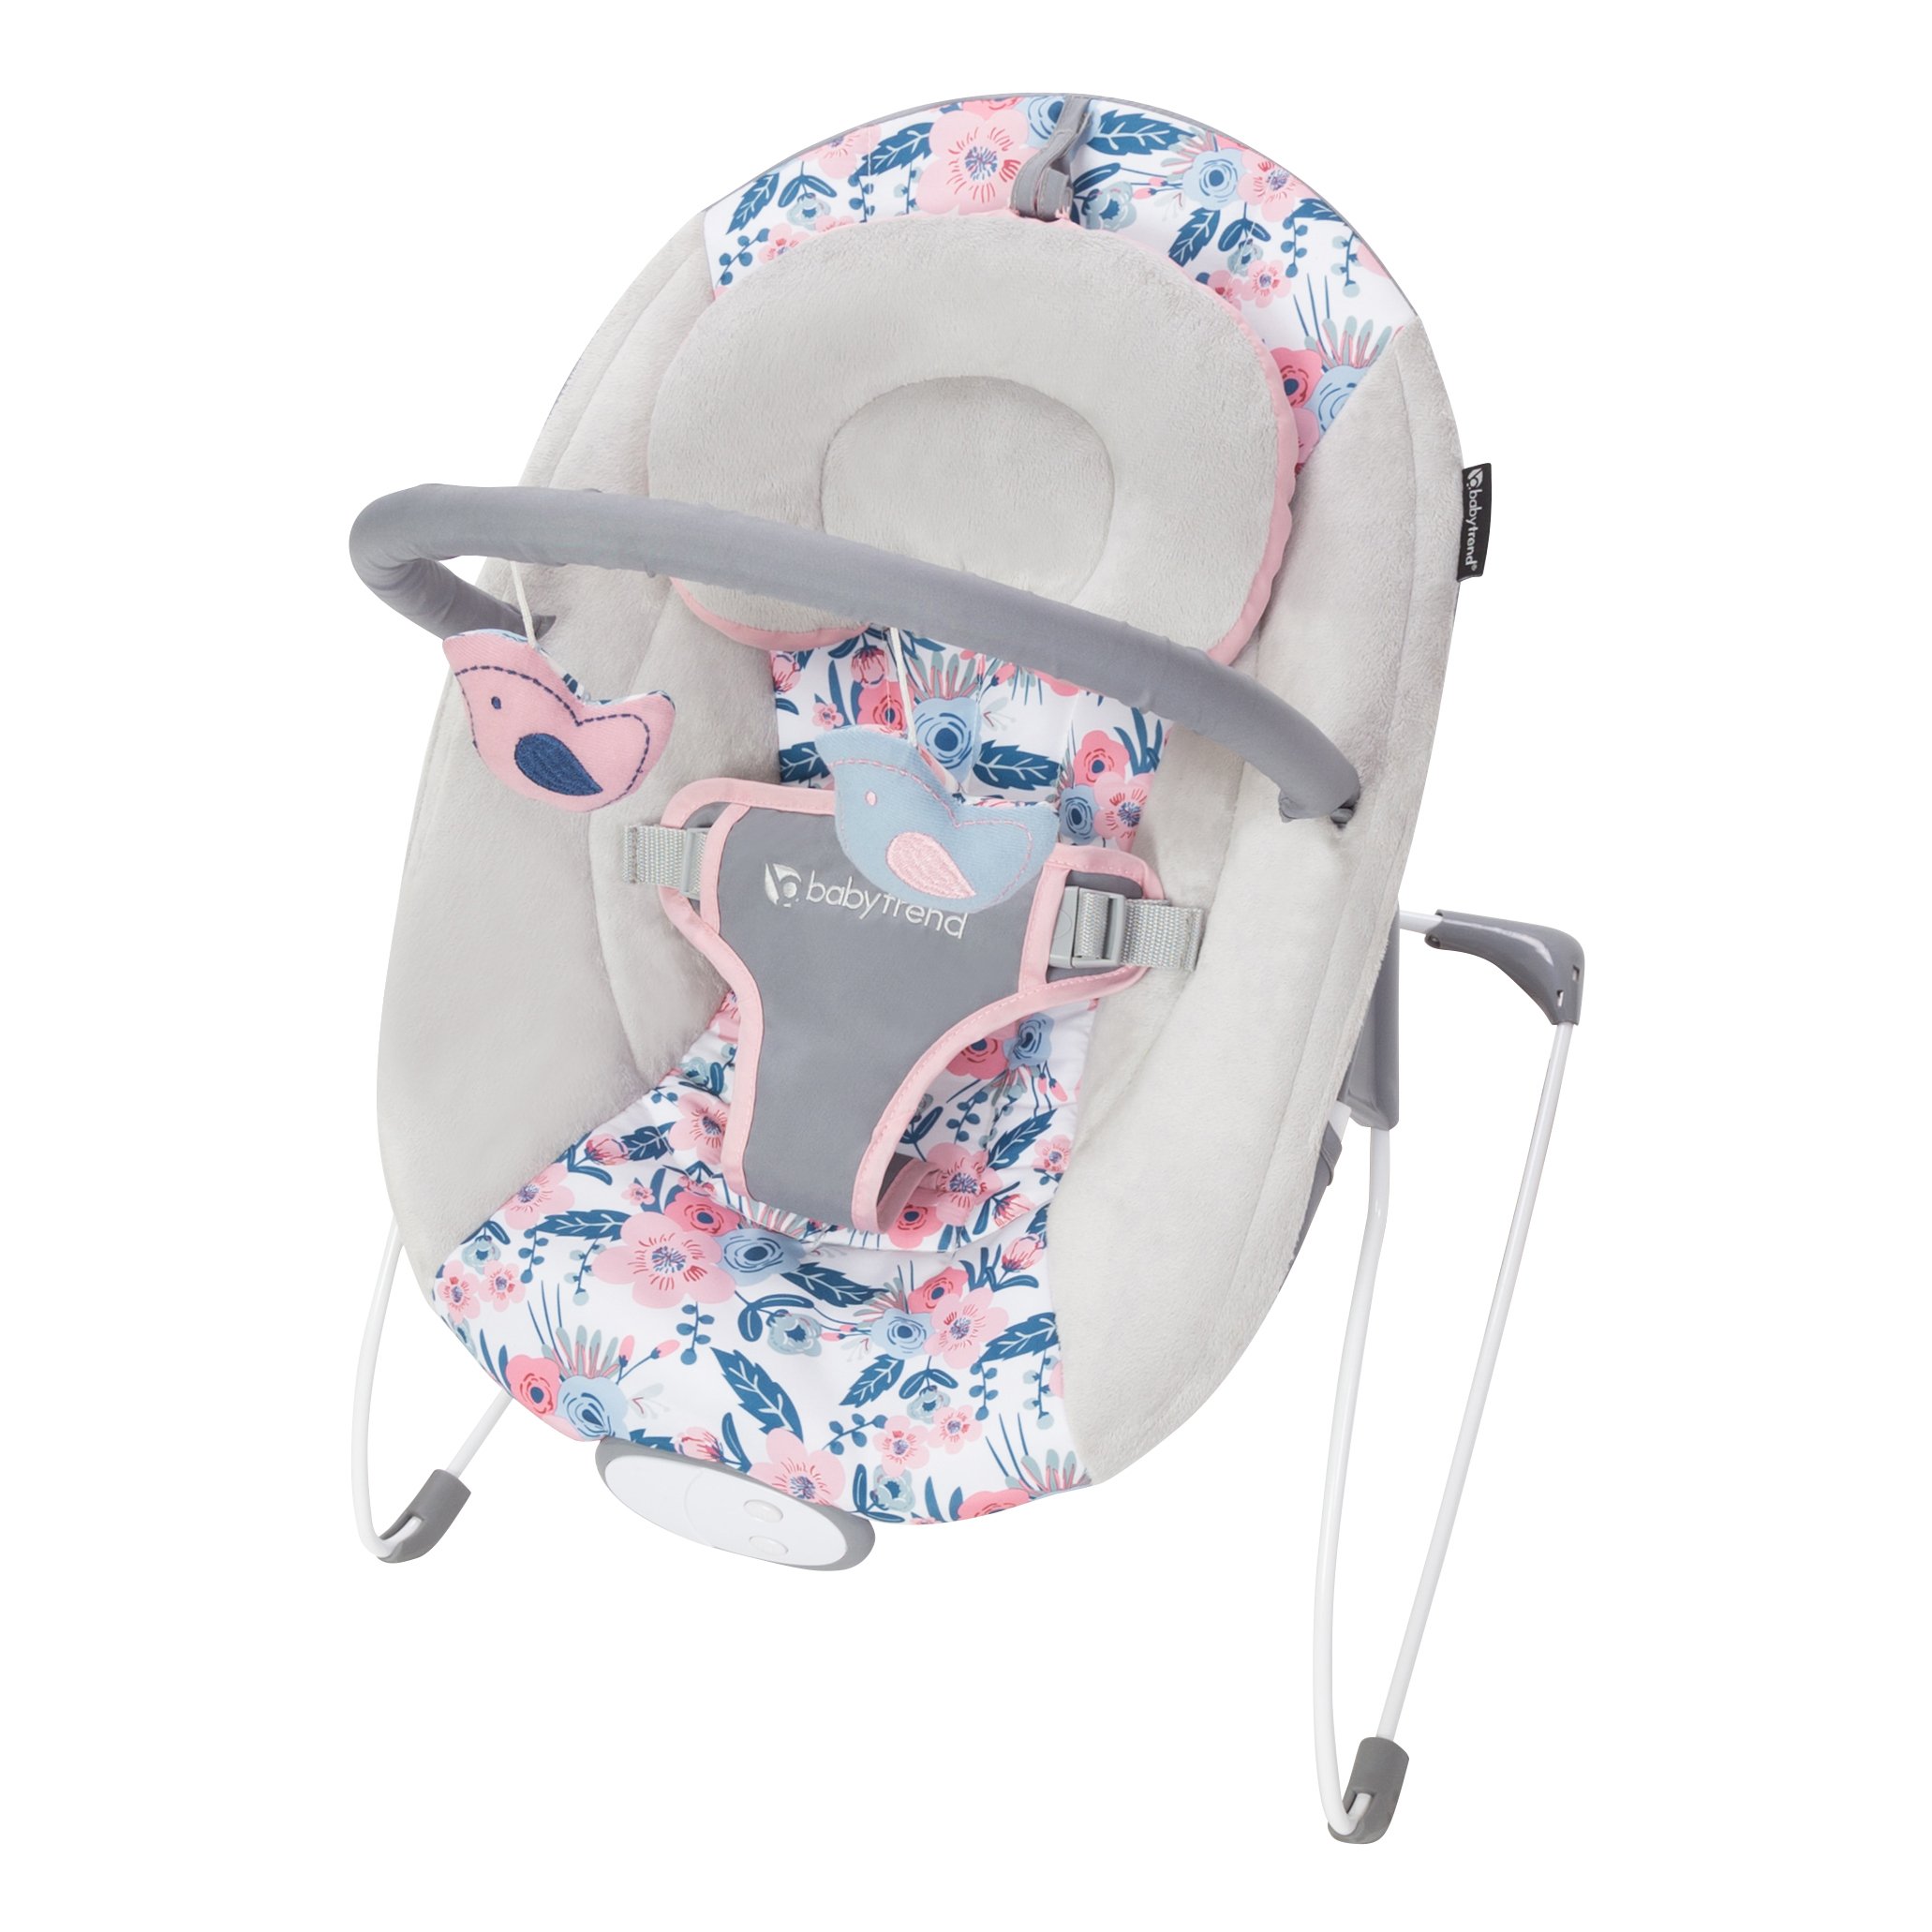 Baby Trend Smart Steps Baby EZ Bouncer (Bluebell Birds or Ziggy Zebra) $34.95 + Free Shipping w/ Prime or on $35+